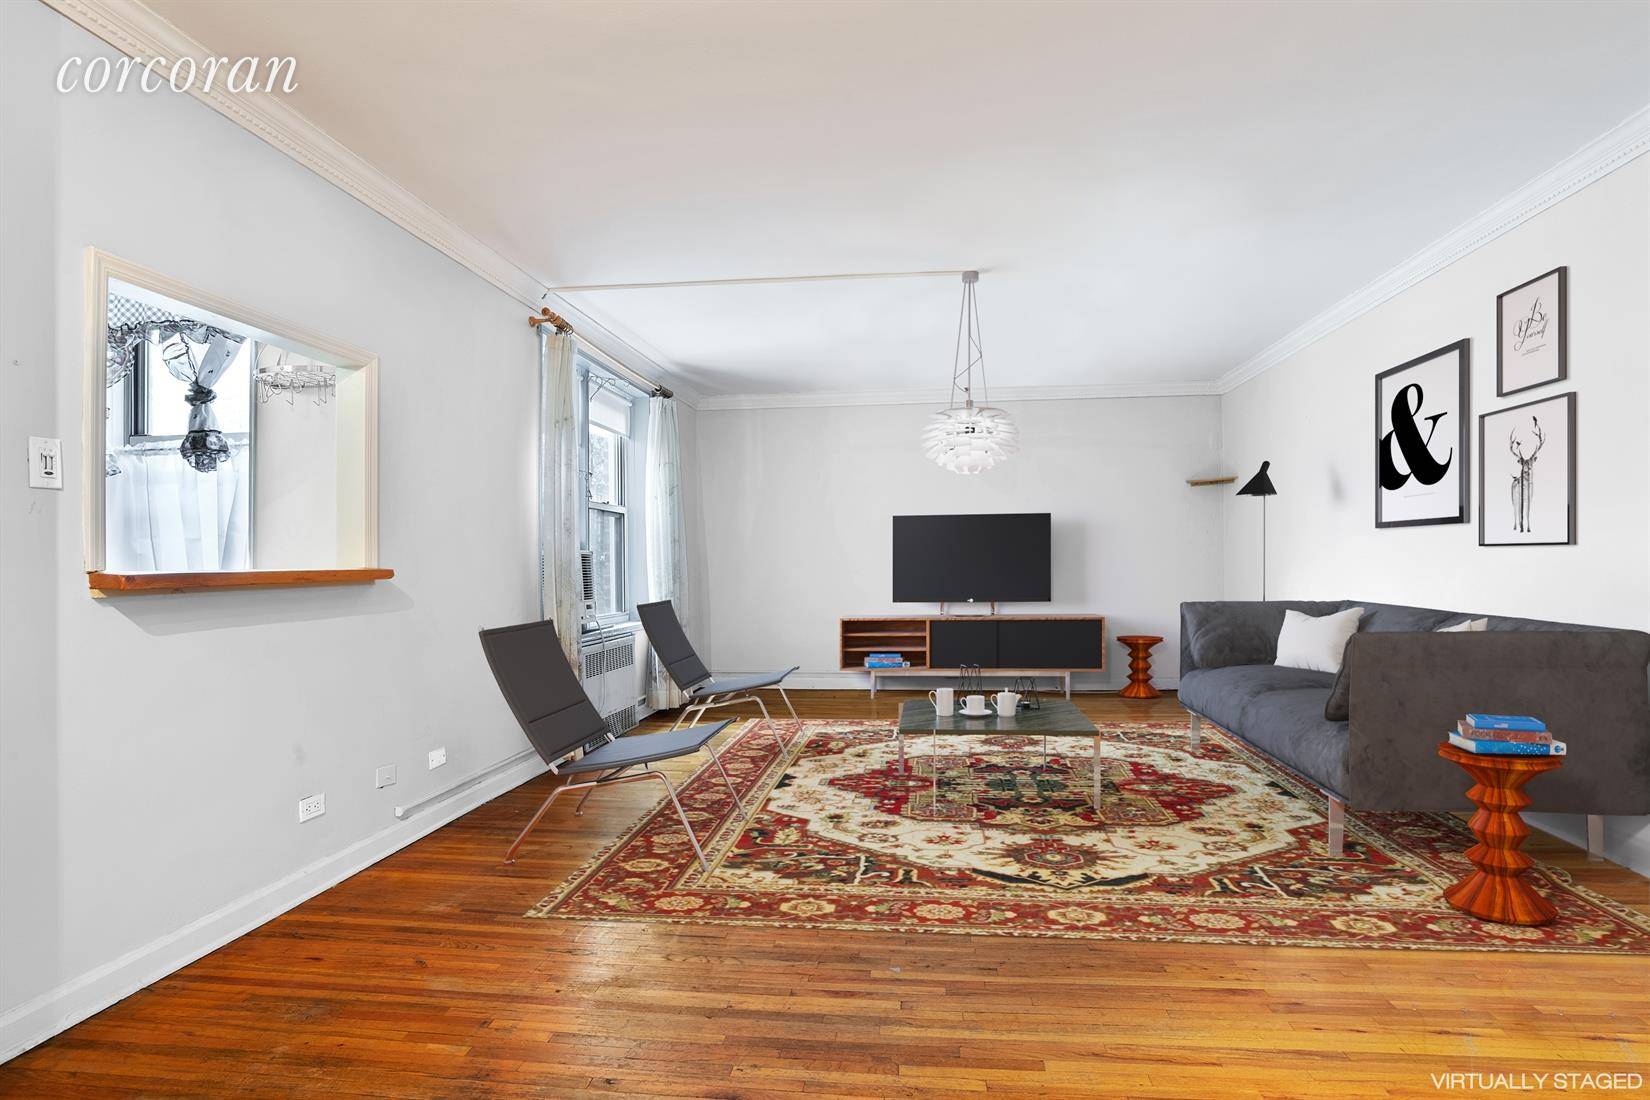 PRICED TO SELL ! FLOORS REFINISHED AND APARTMENT FRESHLY PAINTED Windsor Terrace Large bedroom coop apartment across the street from Greenwood Cemetery.